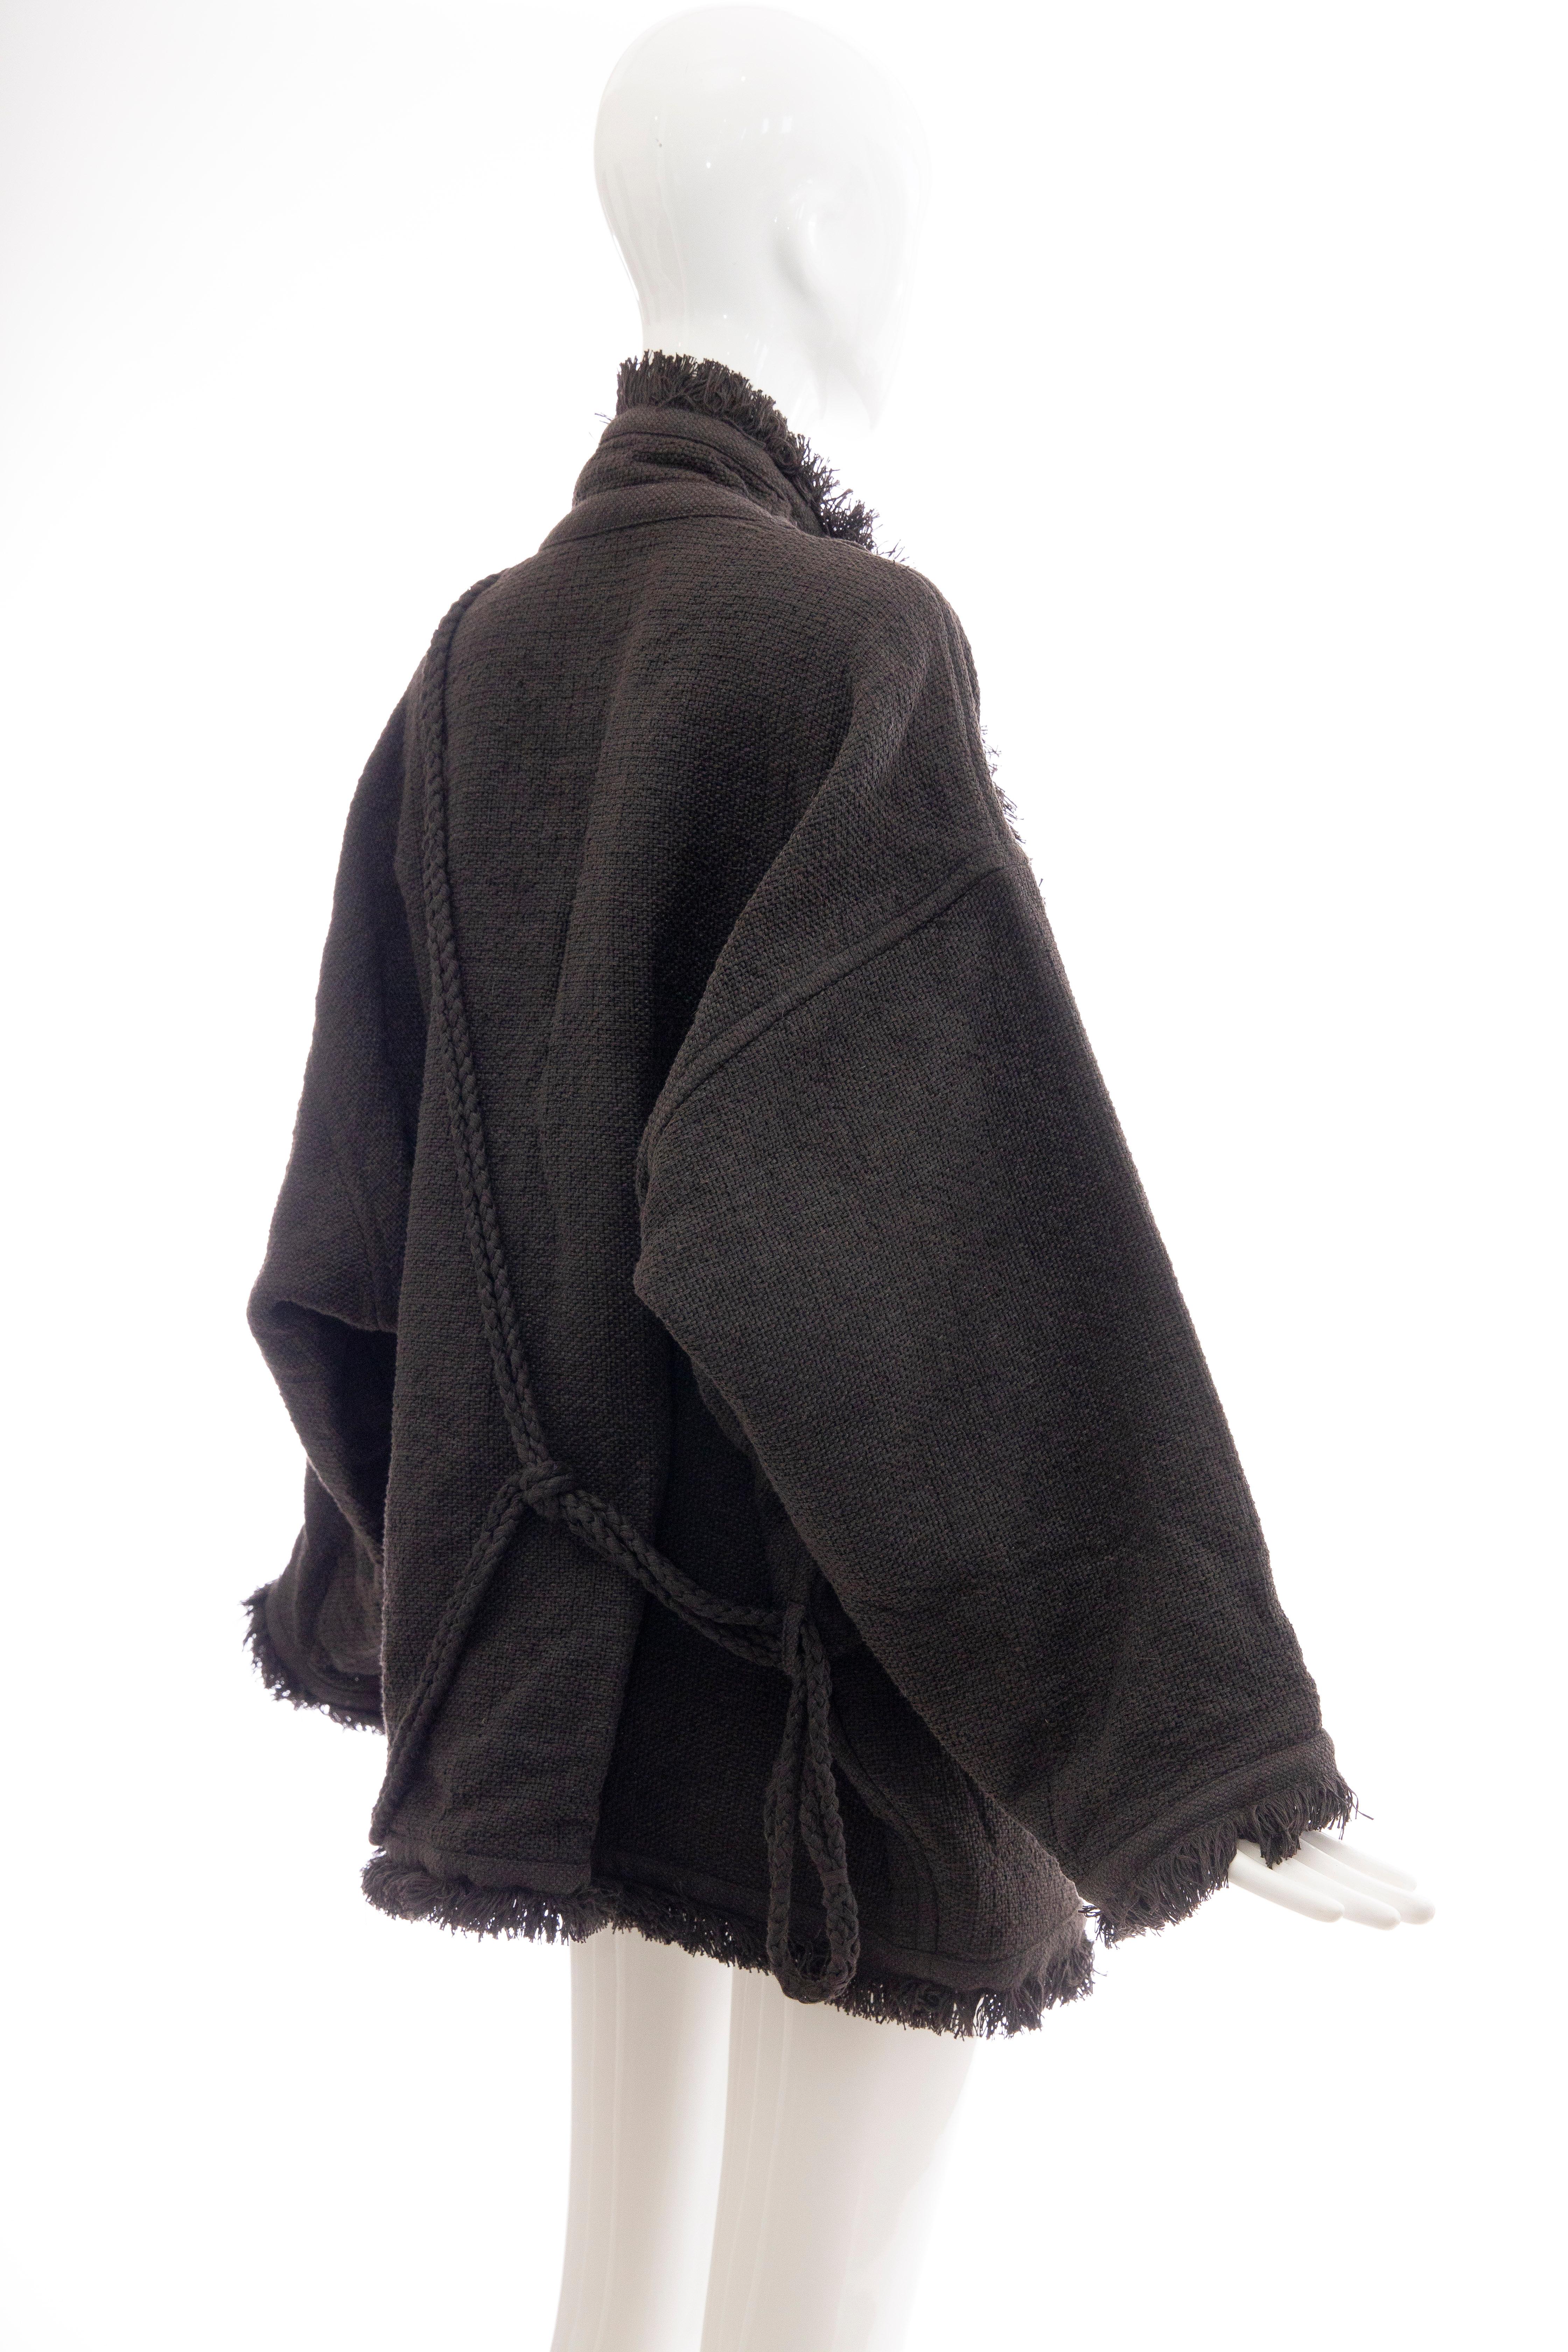 Black Issey Miyake Charcoal Grey Fringed Cotton Wool Woven Jacket, Fall 1984 For Sale